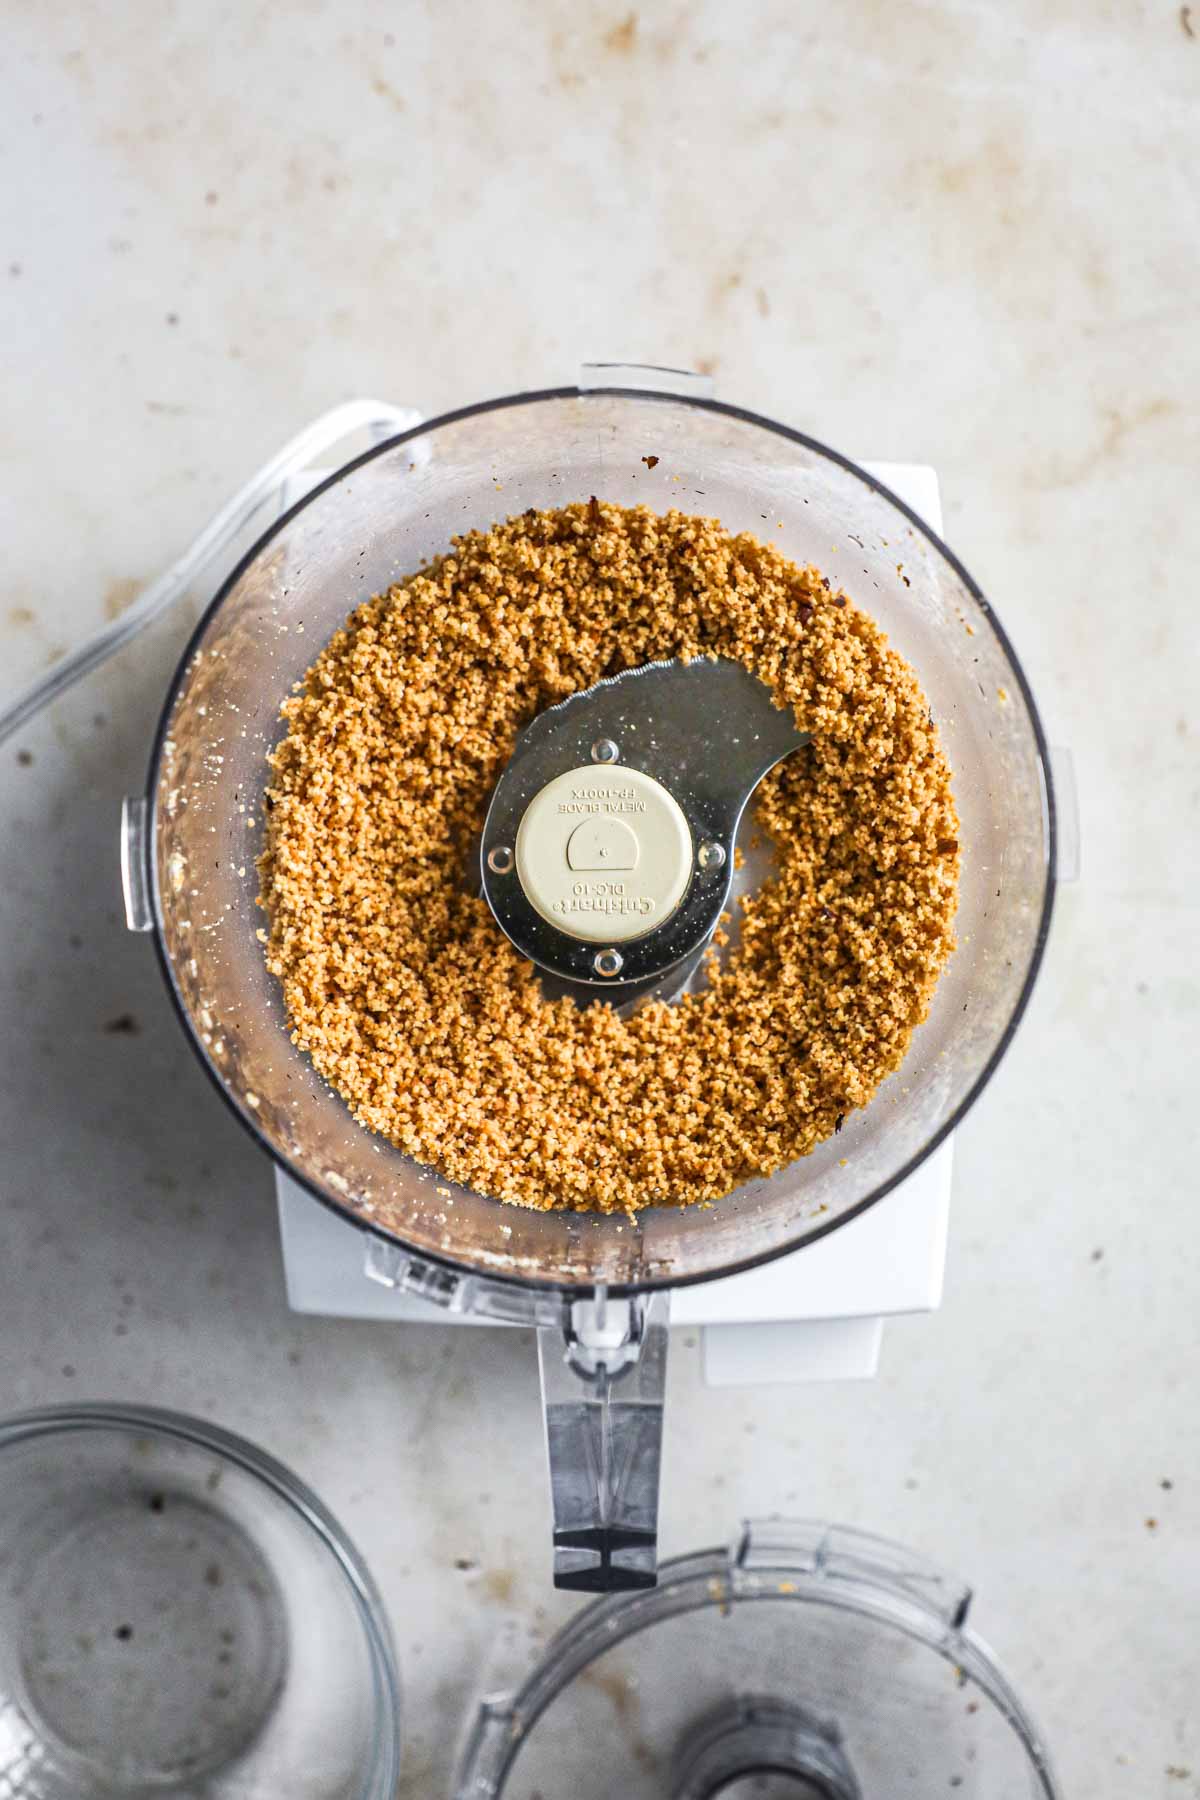 Hazelnut flour/meal made from toasted hazelnuts in a Cuisinart food processor.